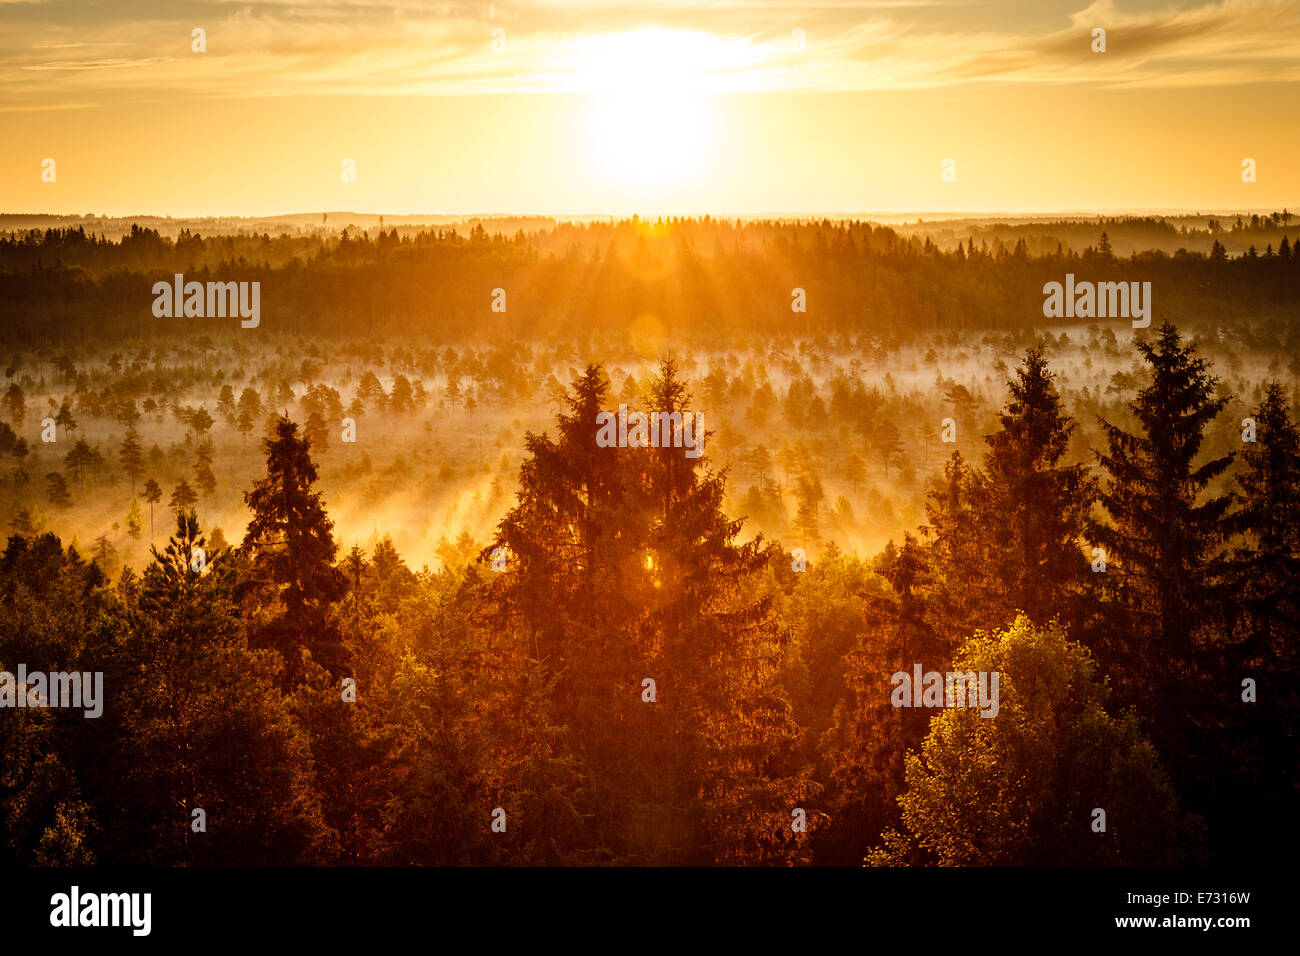 Sun rising on an early morning at the Torronsuo Swamp in Finland. The sun shining bright at the golden hour. Stock Photo